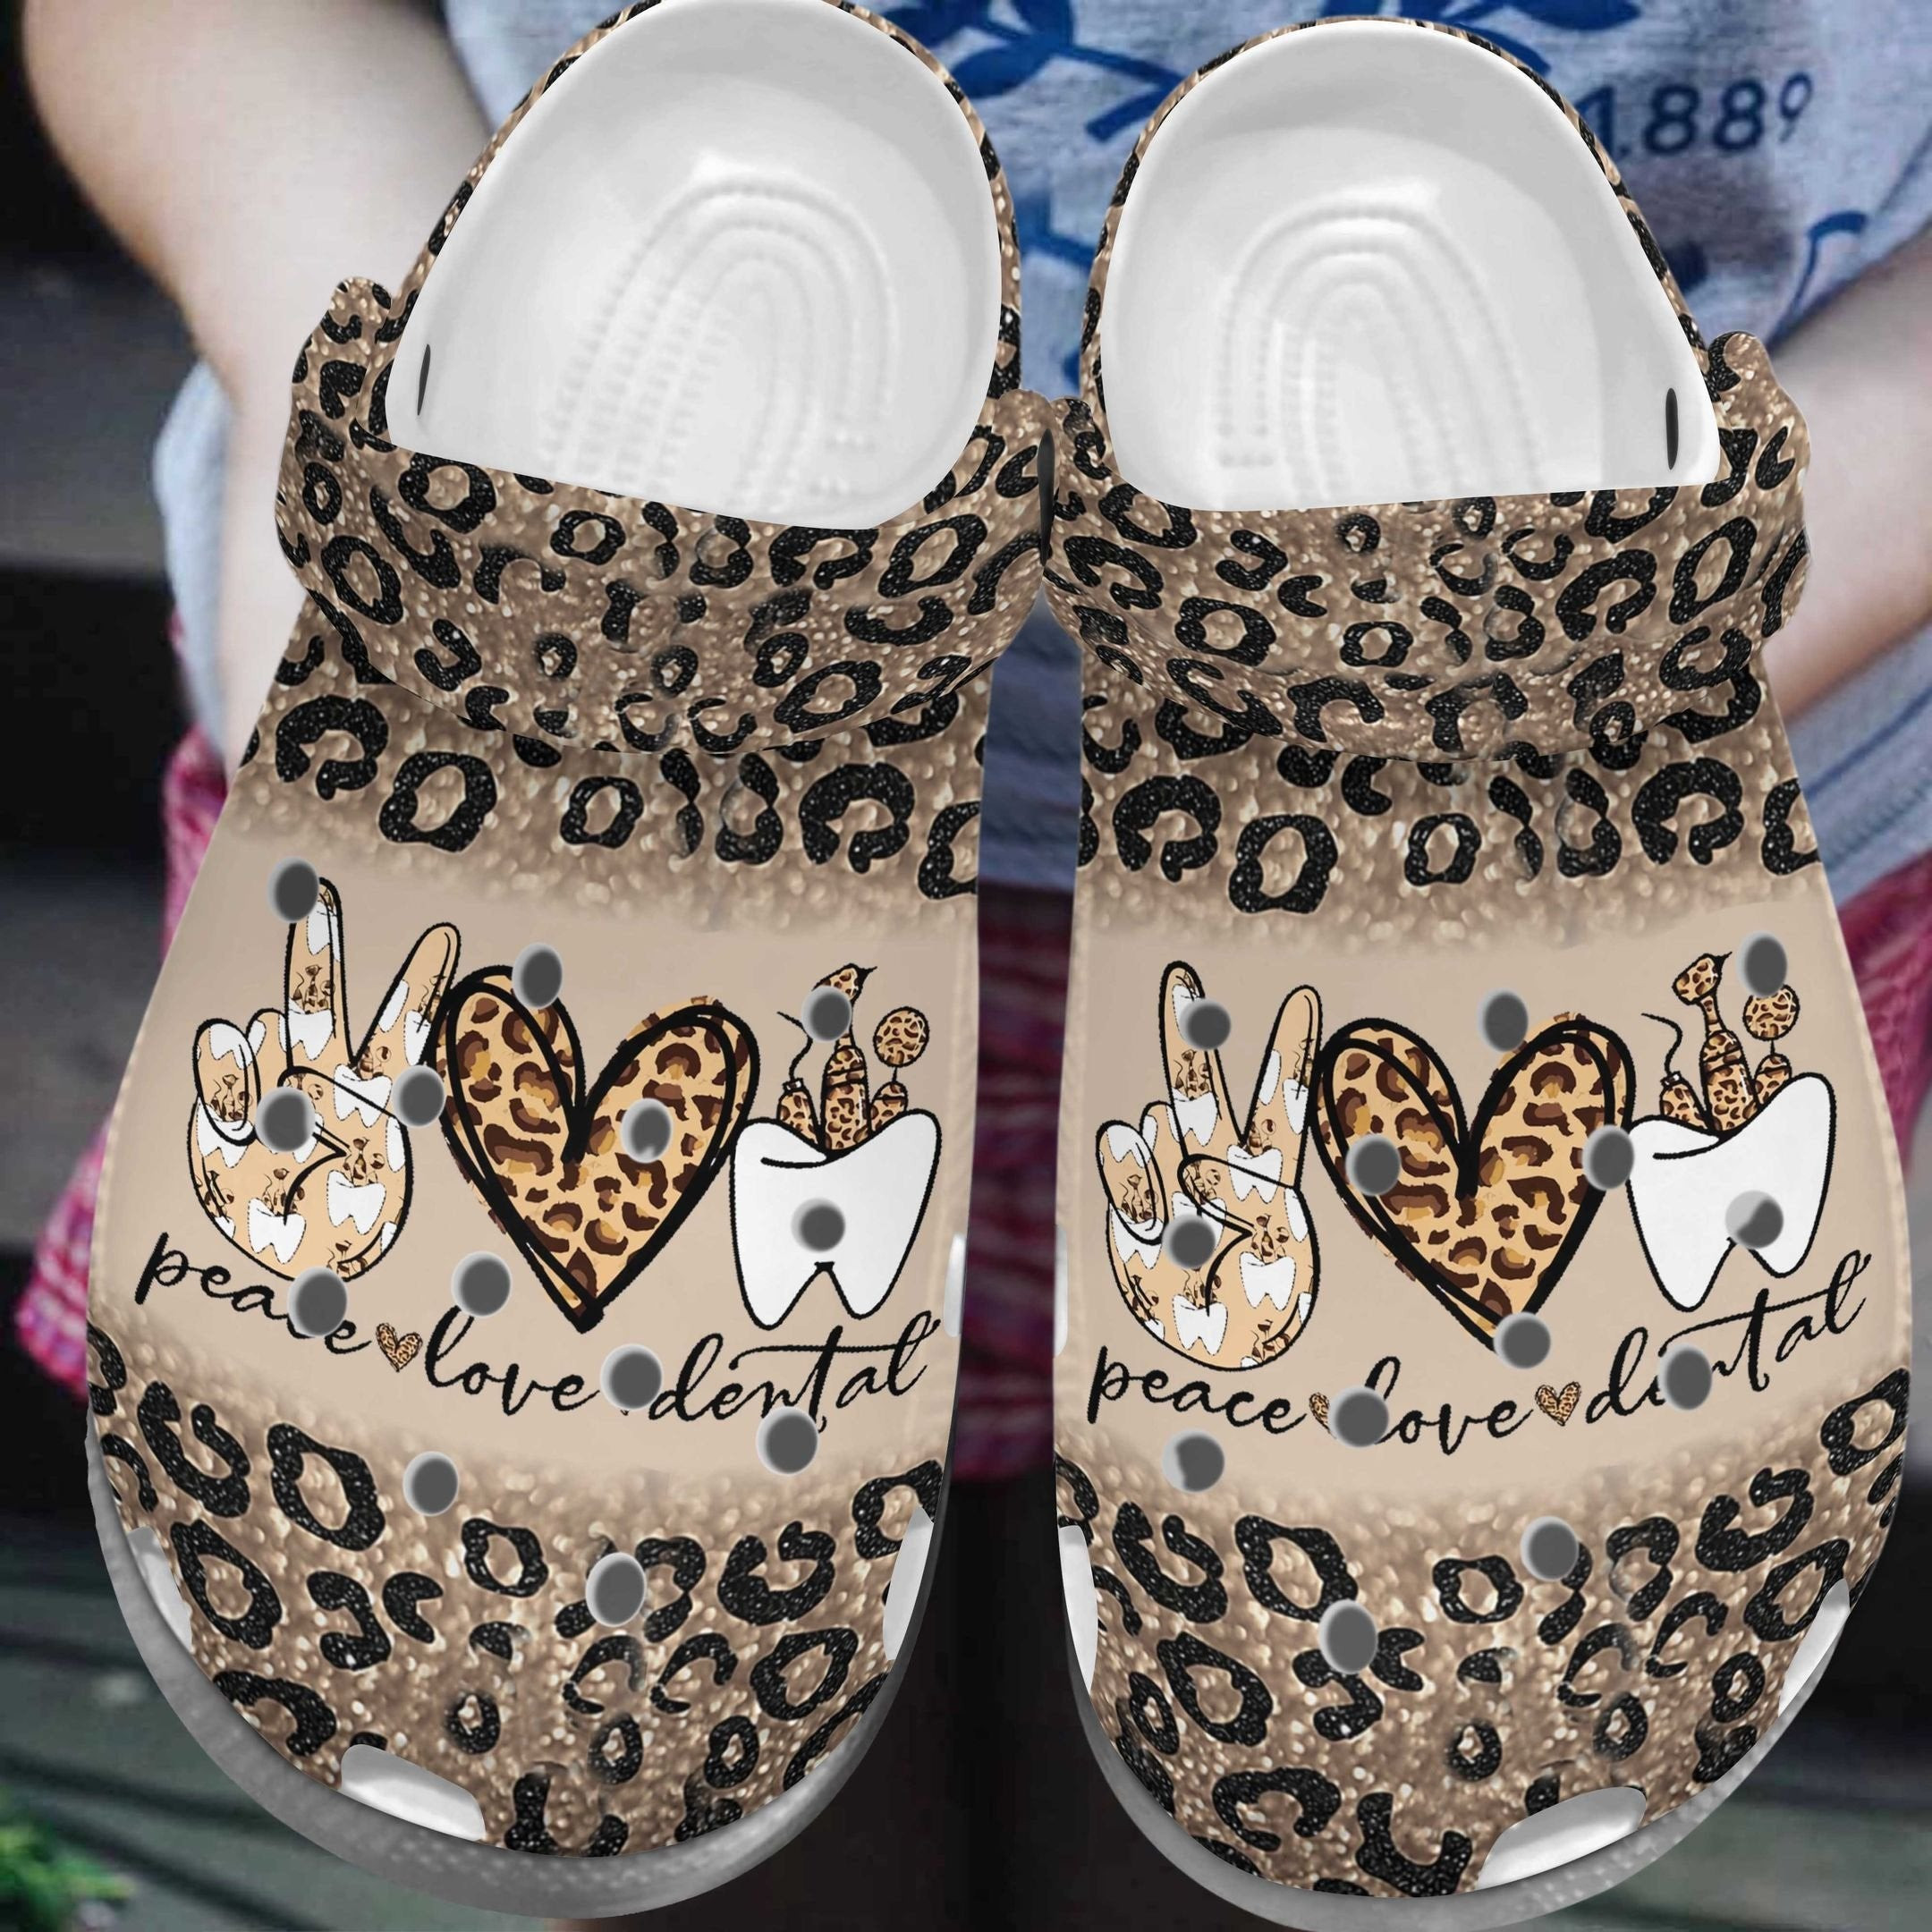 Peace Love Dental Shoes - Dentist Crocs Clogs Birthday Gift For Friends